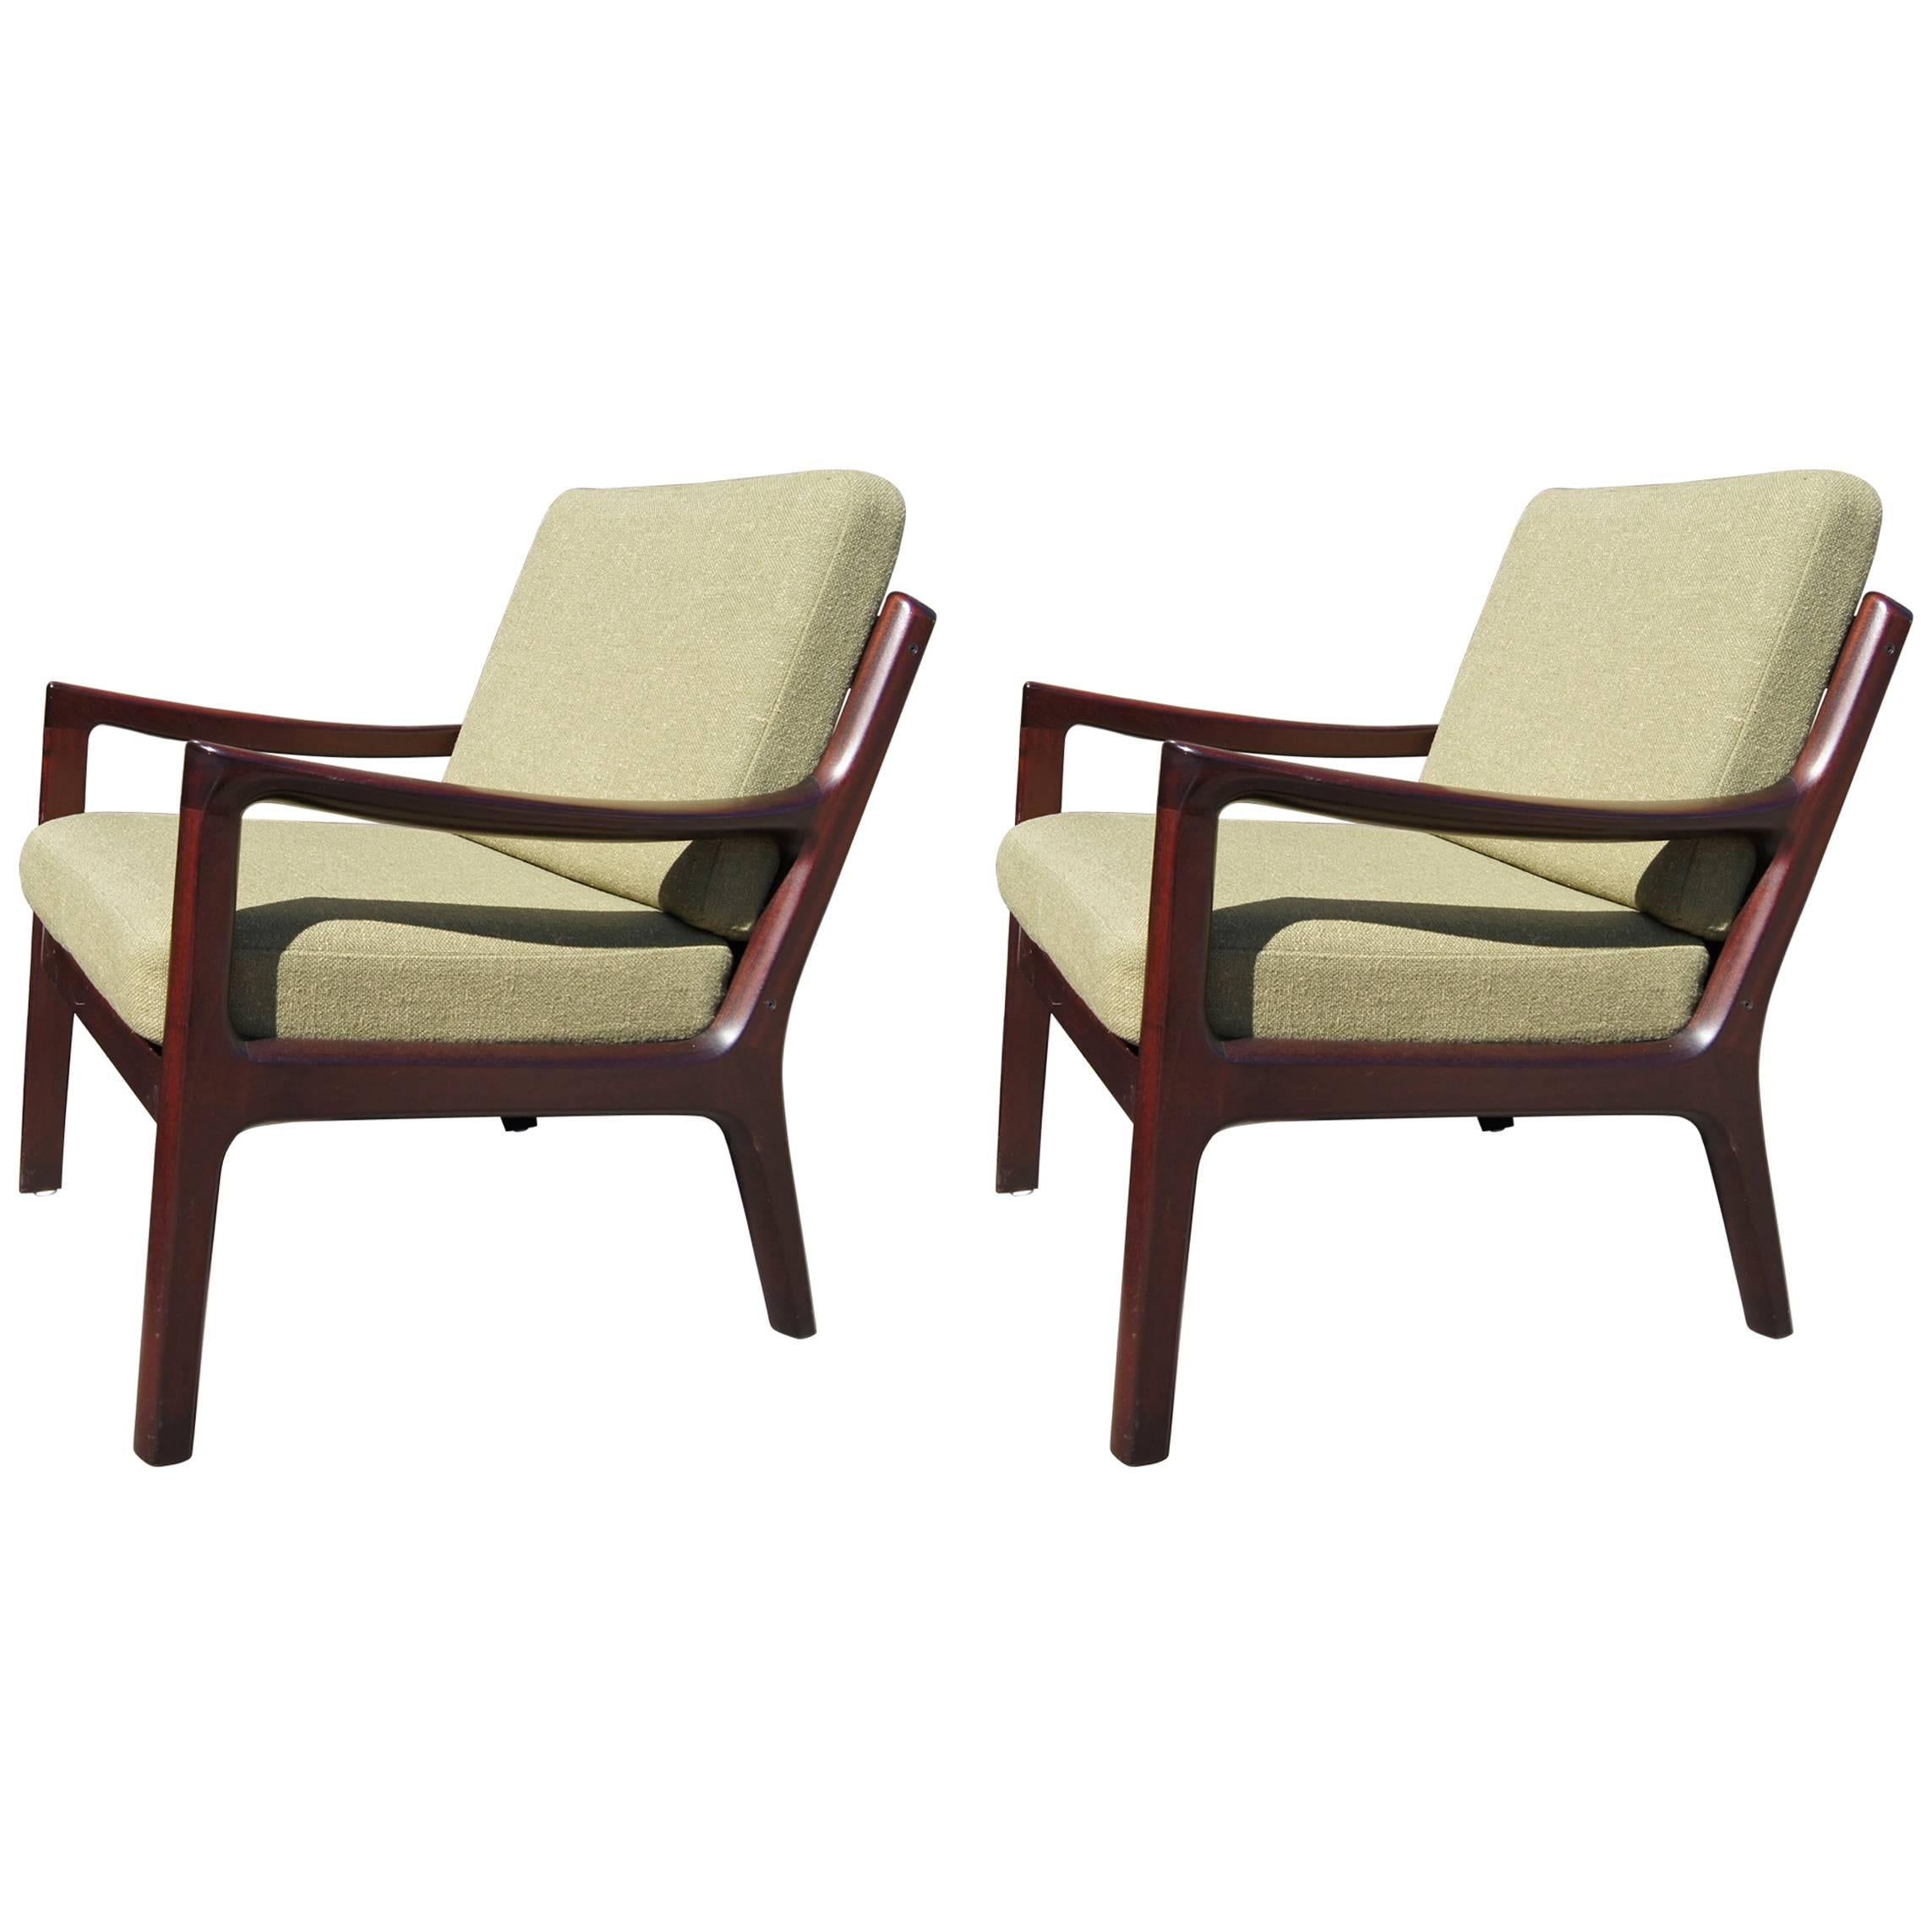 Pair of Senator Armchairs, Model 166, by Ole Wanscher for Cado of Denmark